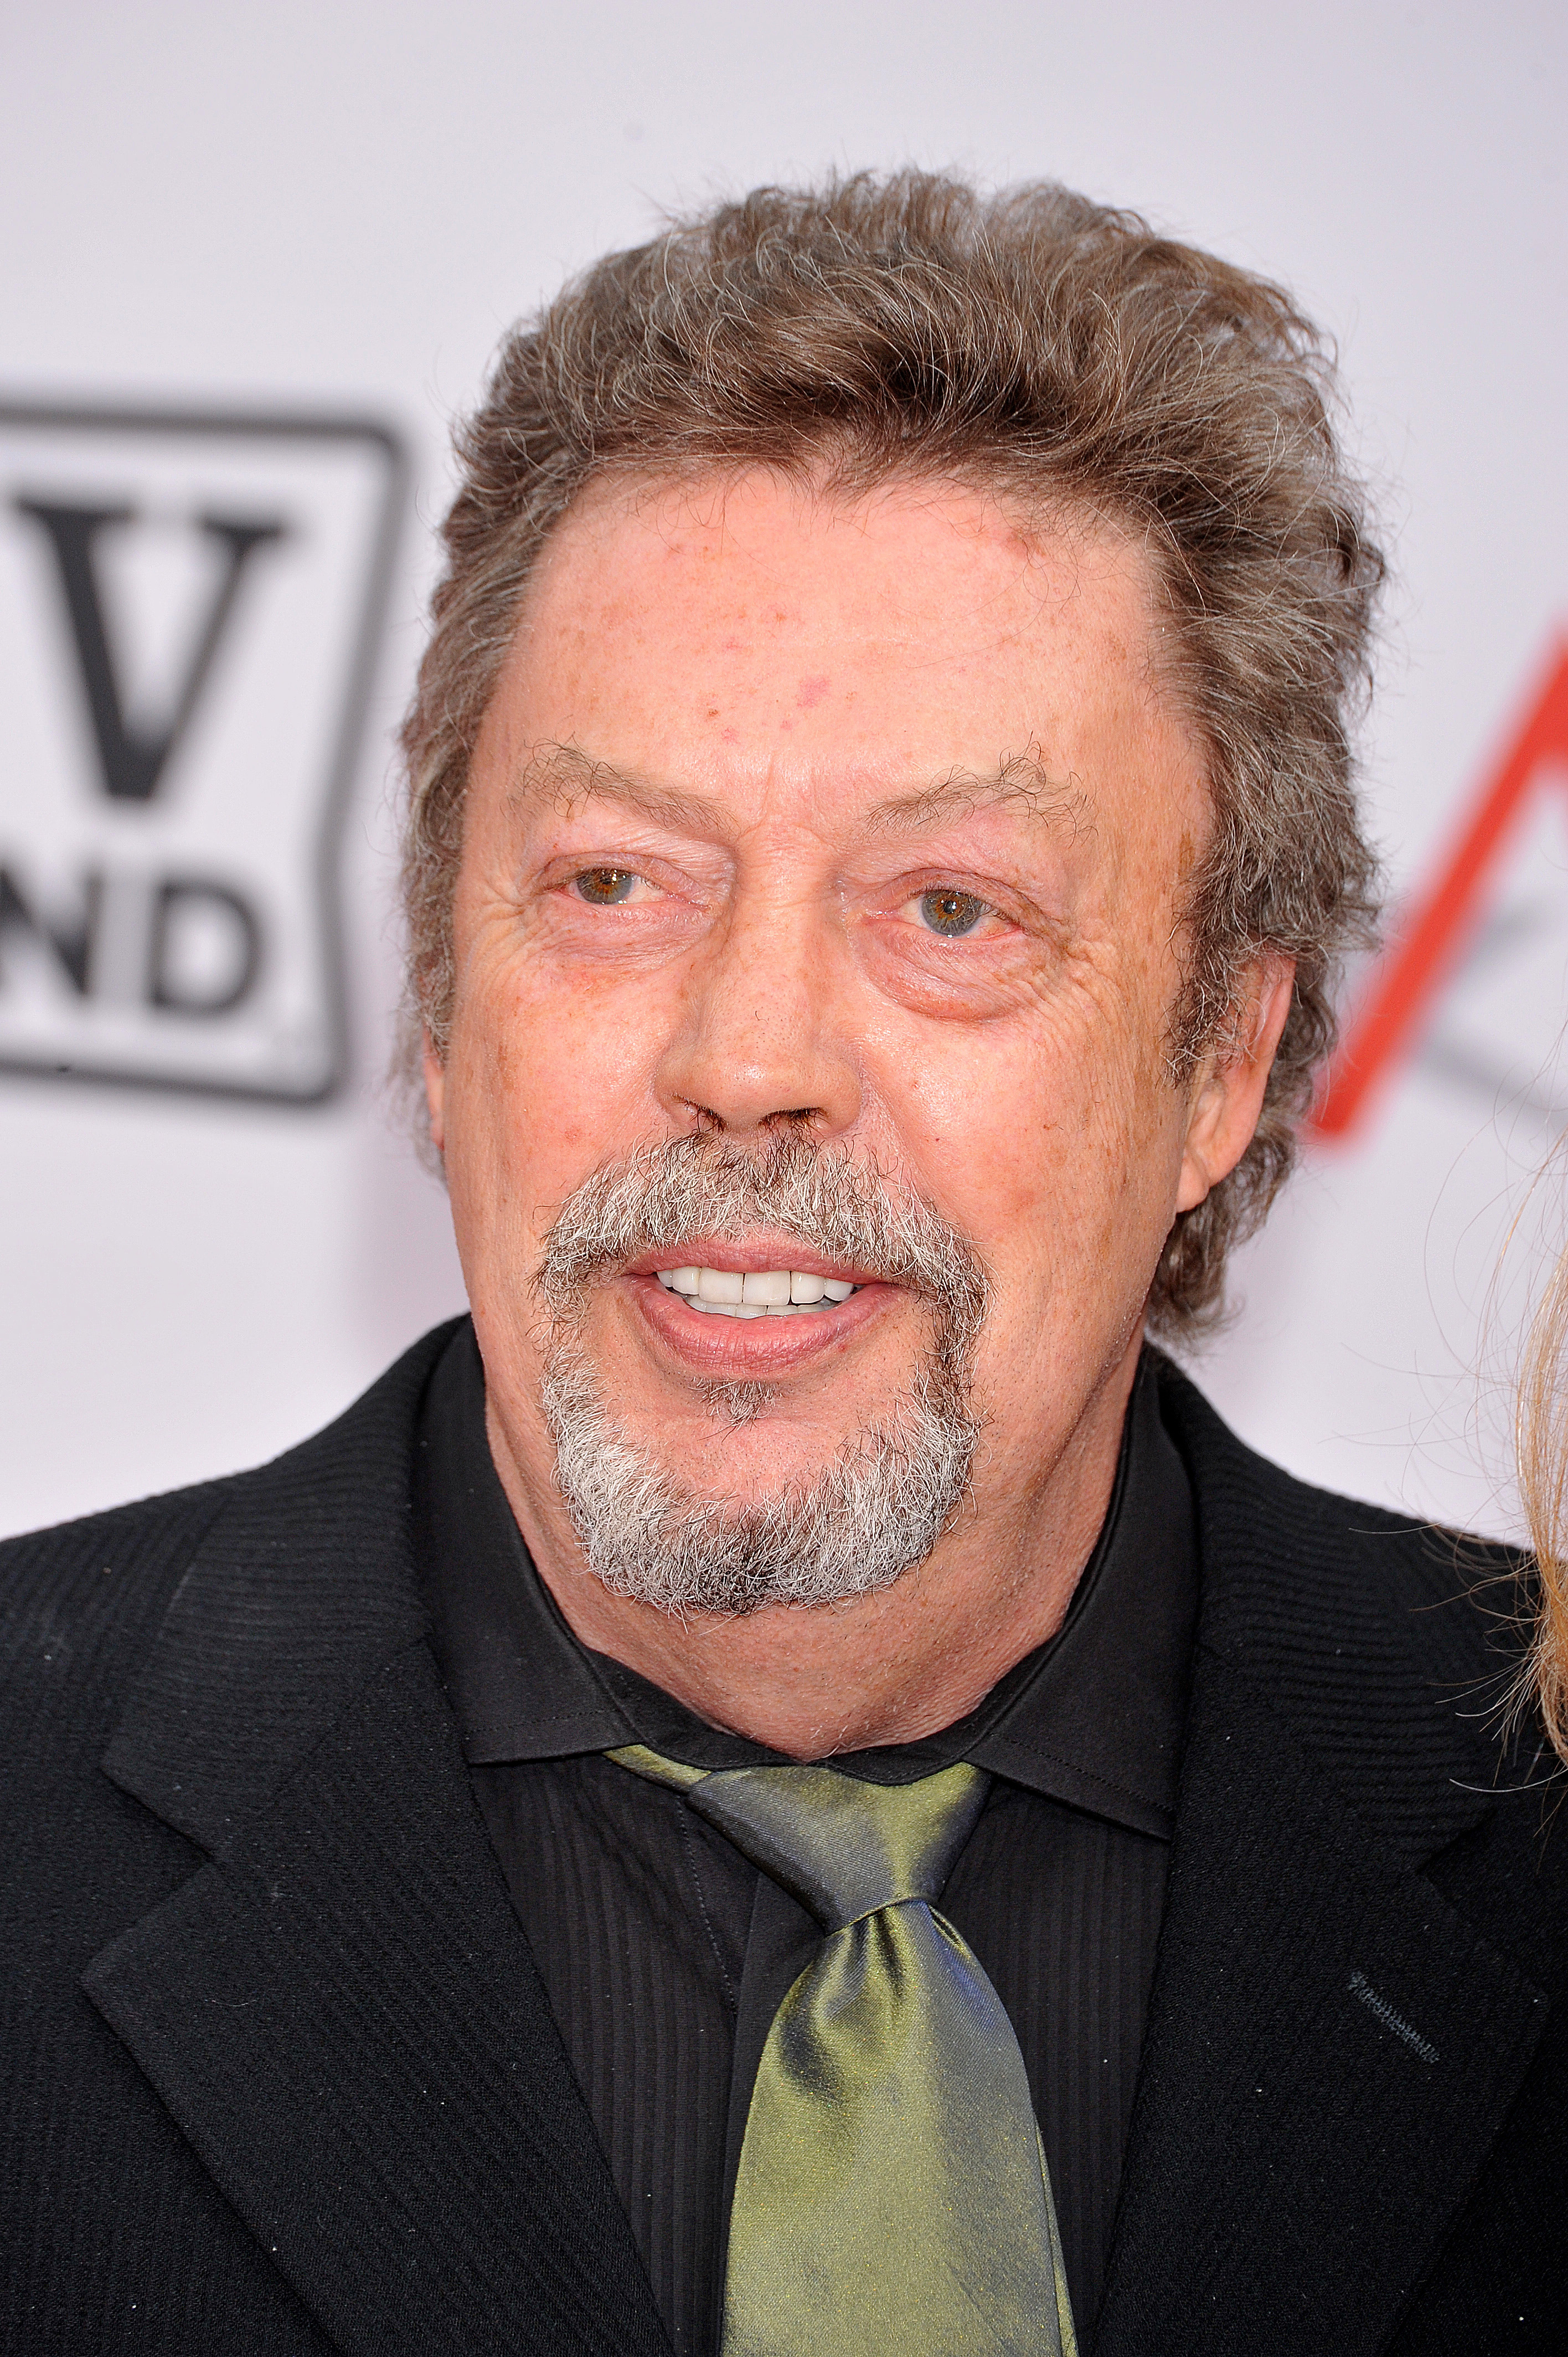 Actor Tim Curry arrives at the 38th AFI Life Achievement Award honoring Mike Nichols held at Sony Pictures Studios on June 10, 2010 in Culver City | Source: Getty Images